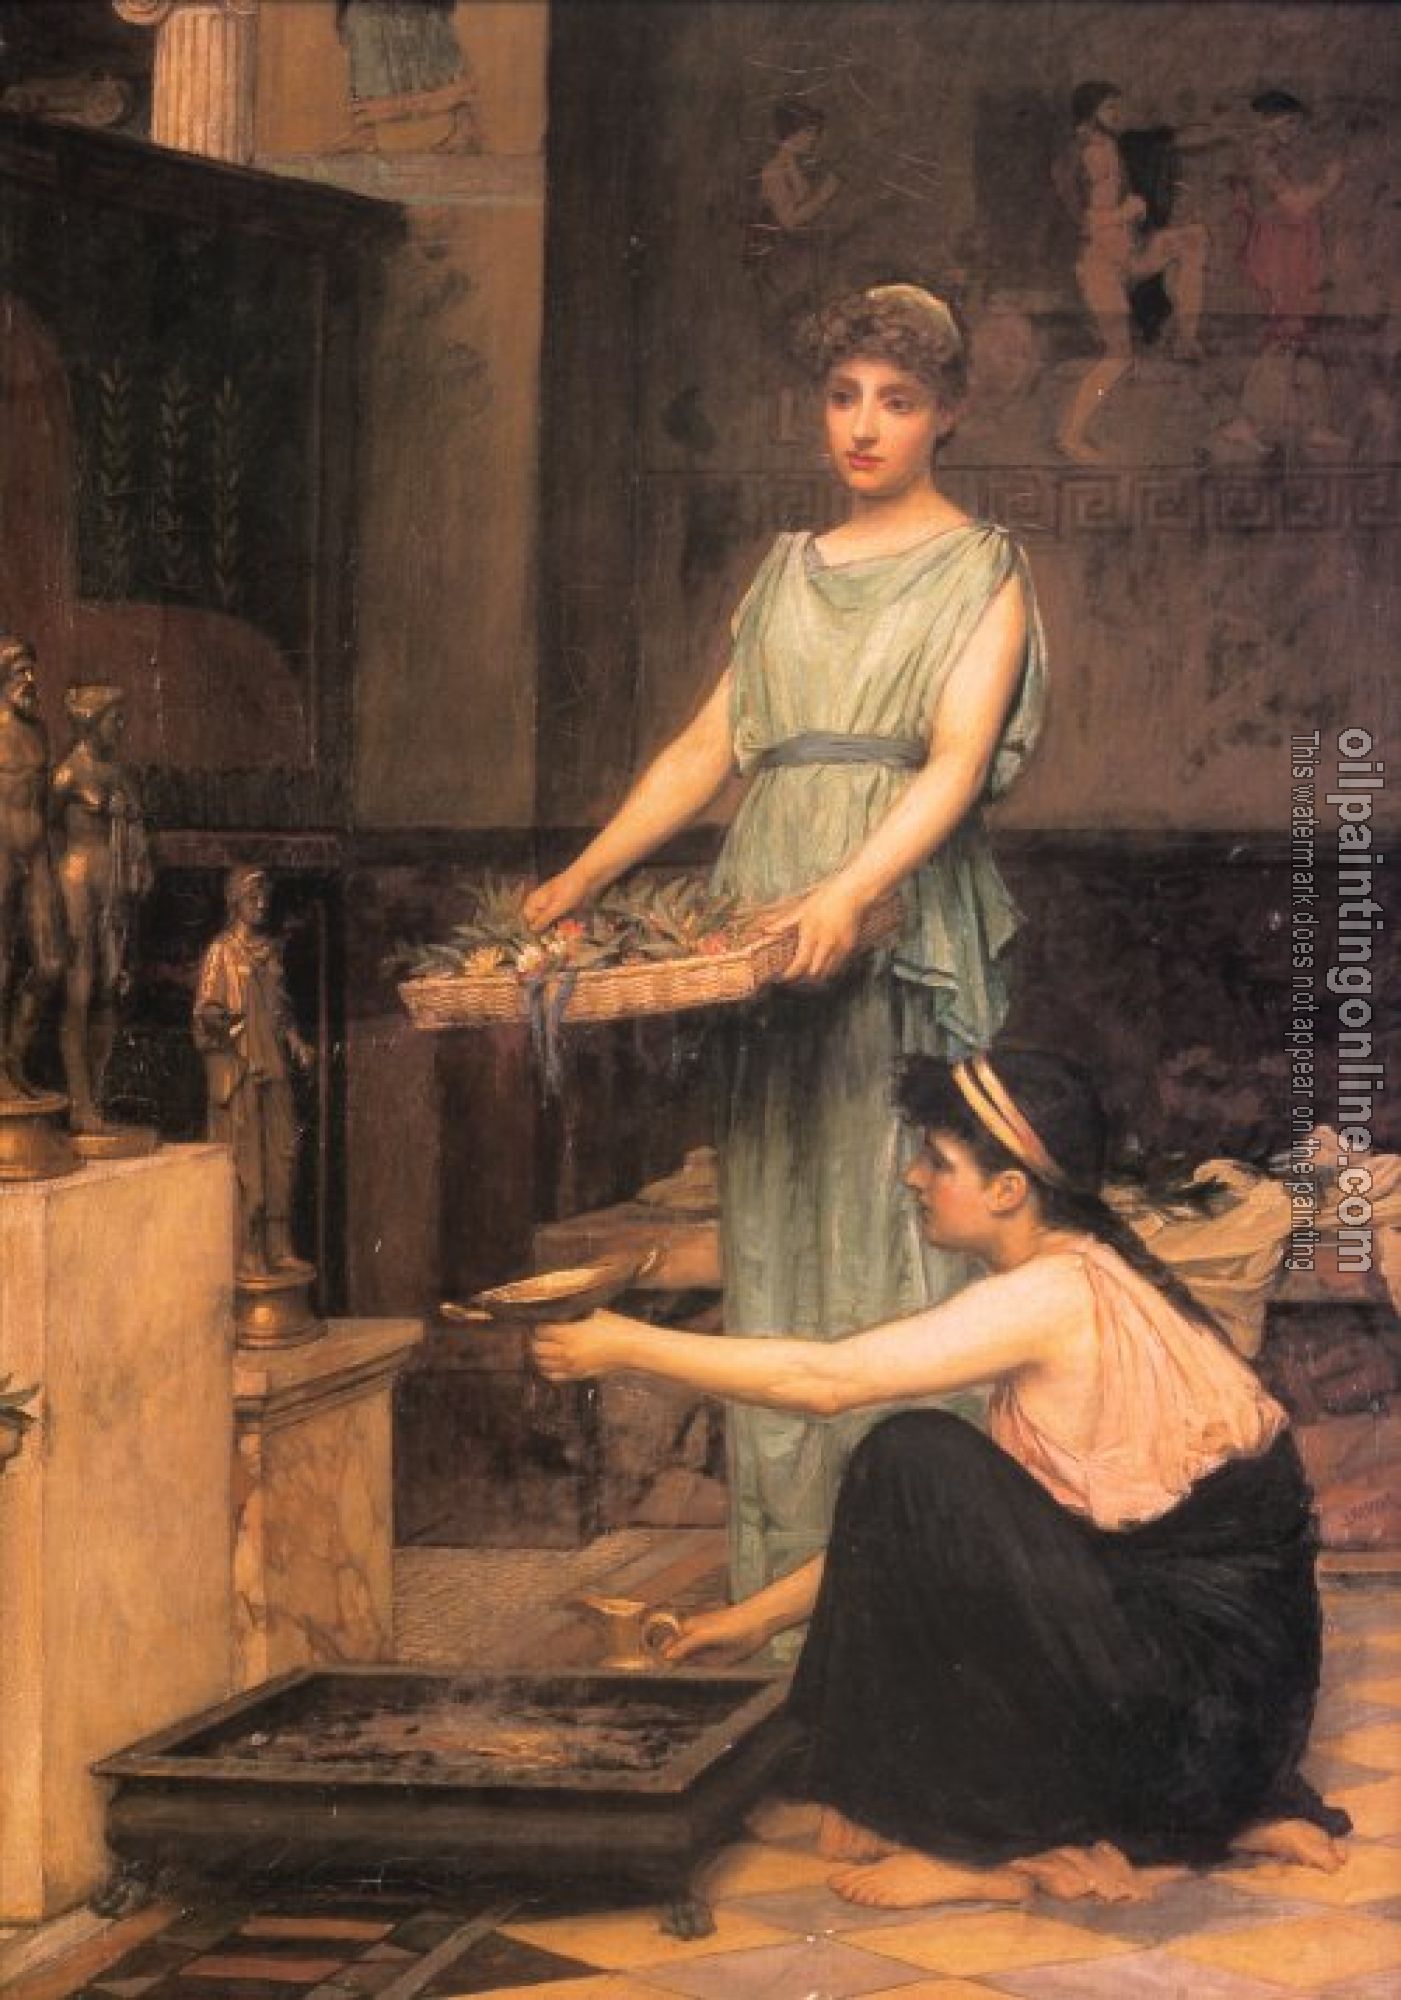 Waterhouse, John William - Waterhouse, John William oil painting